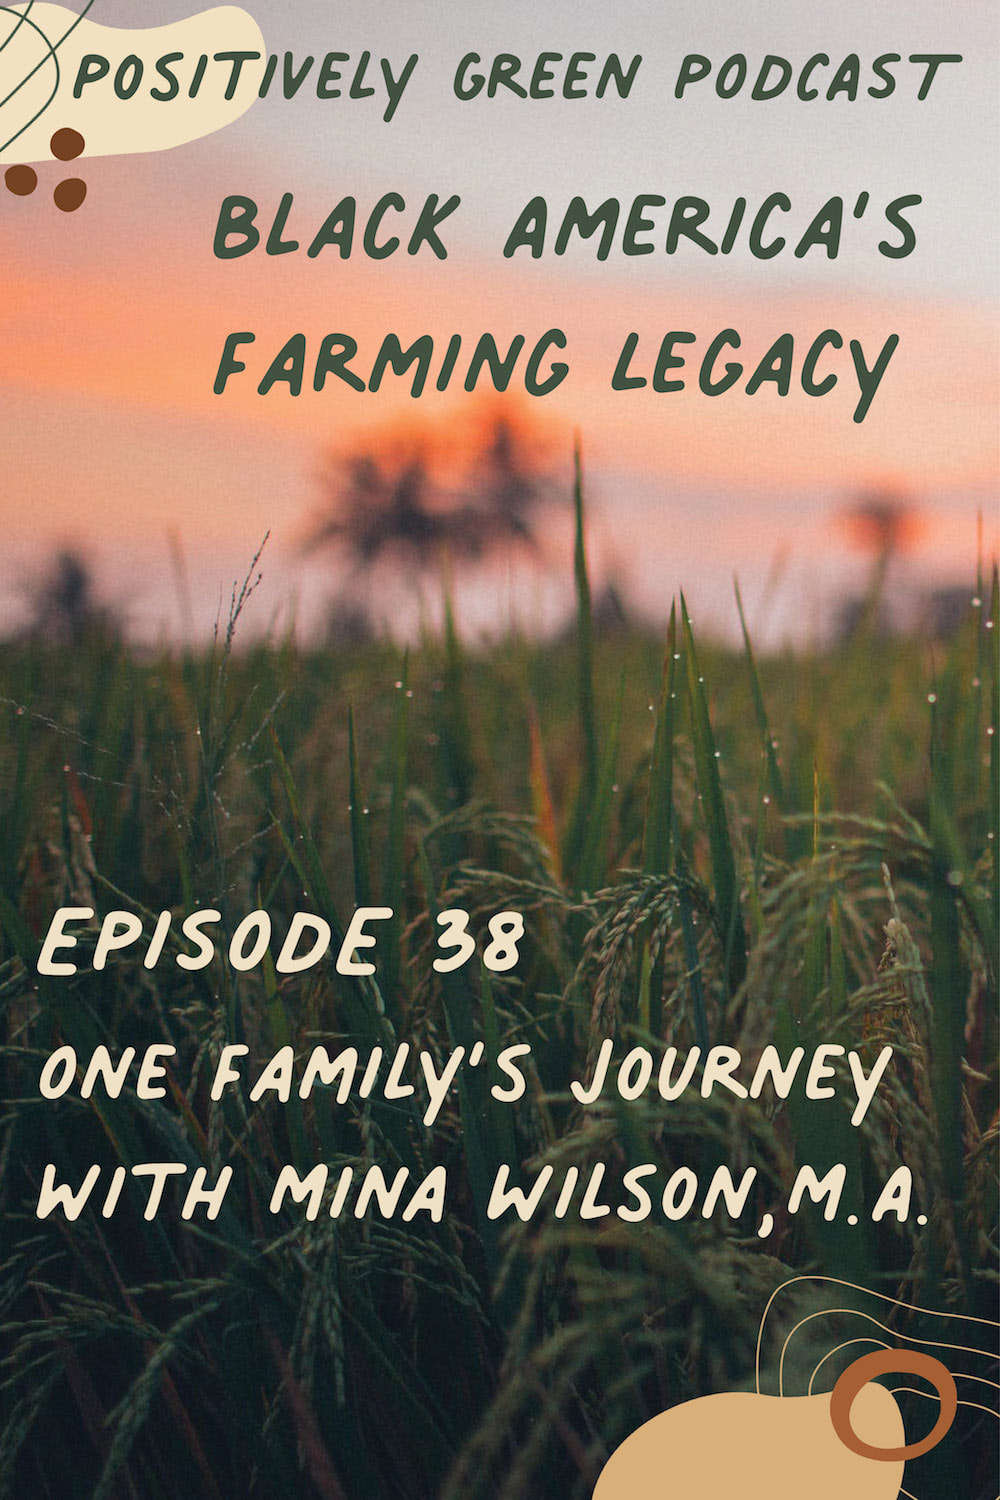 The Positively Green Podcast Episode 38 Black America's Farming Legacy - One Family's Journey with Mina Wilson